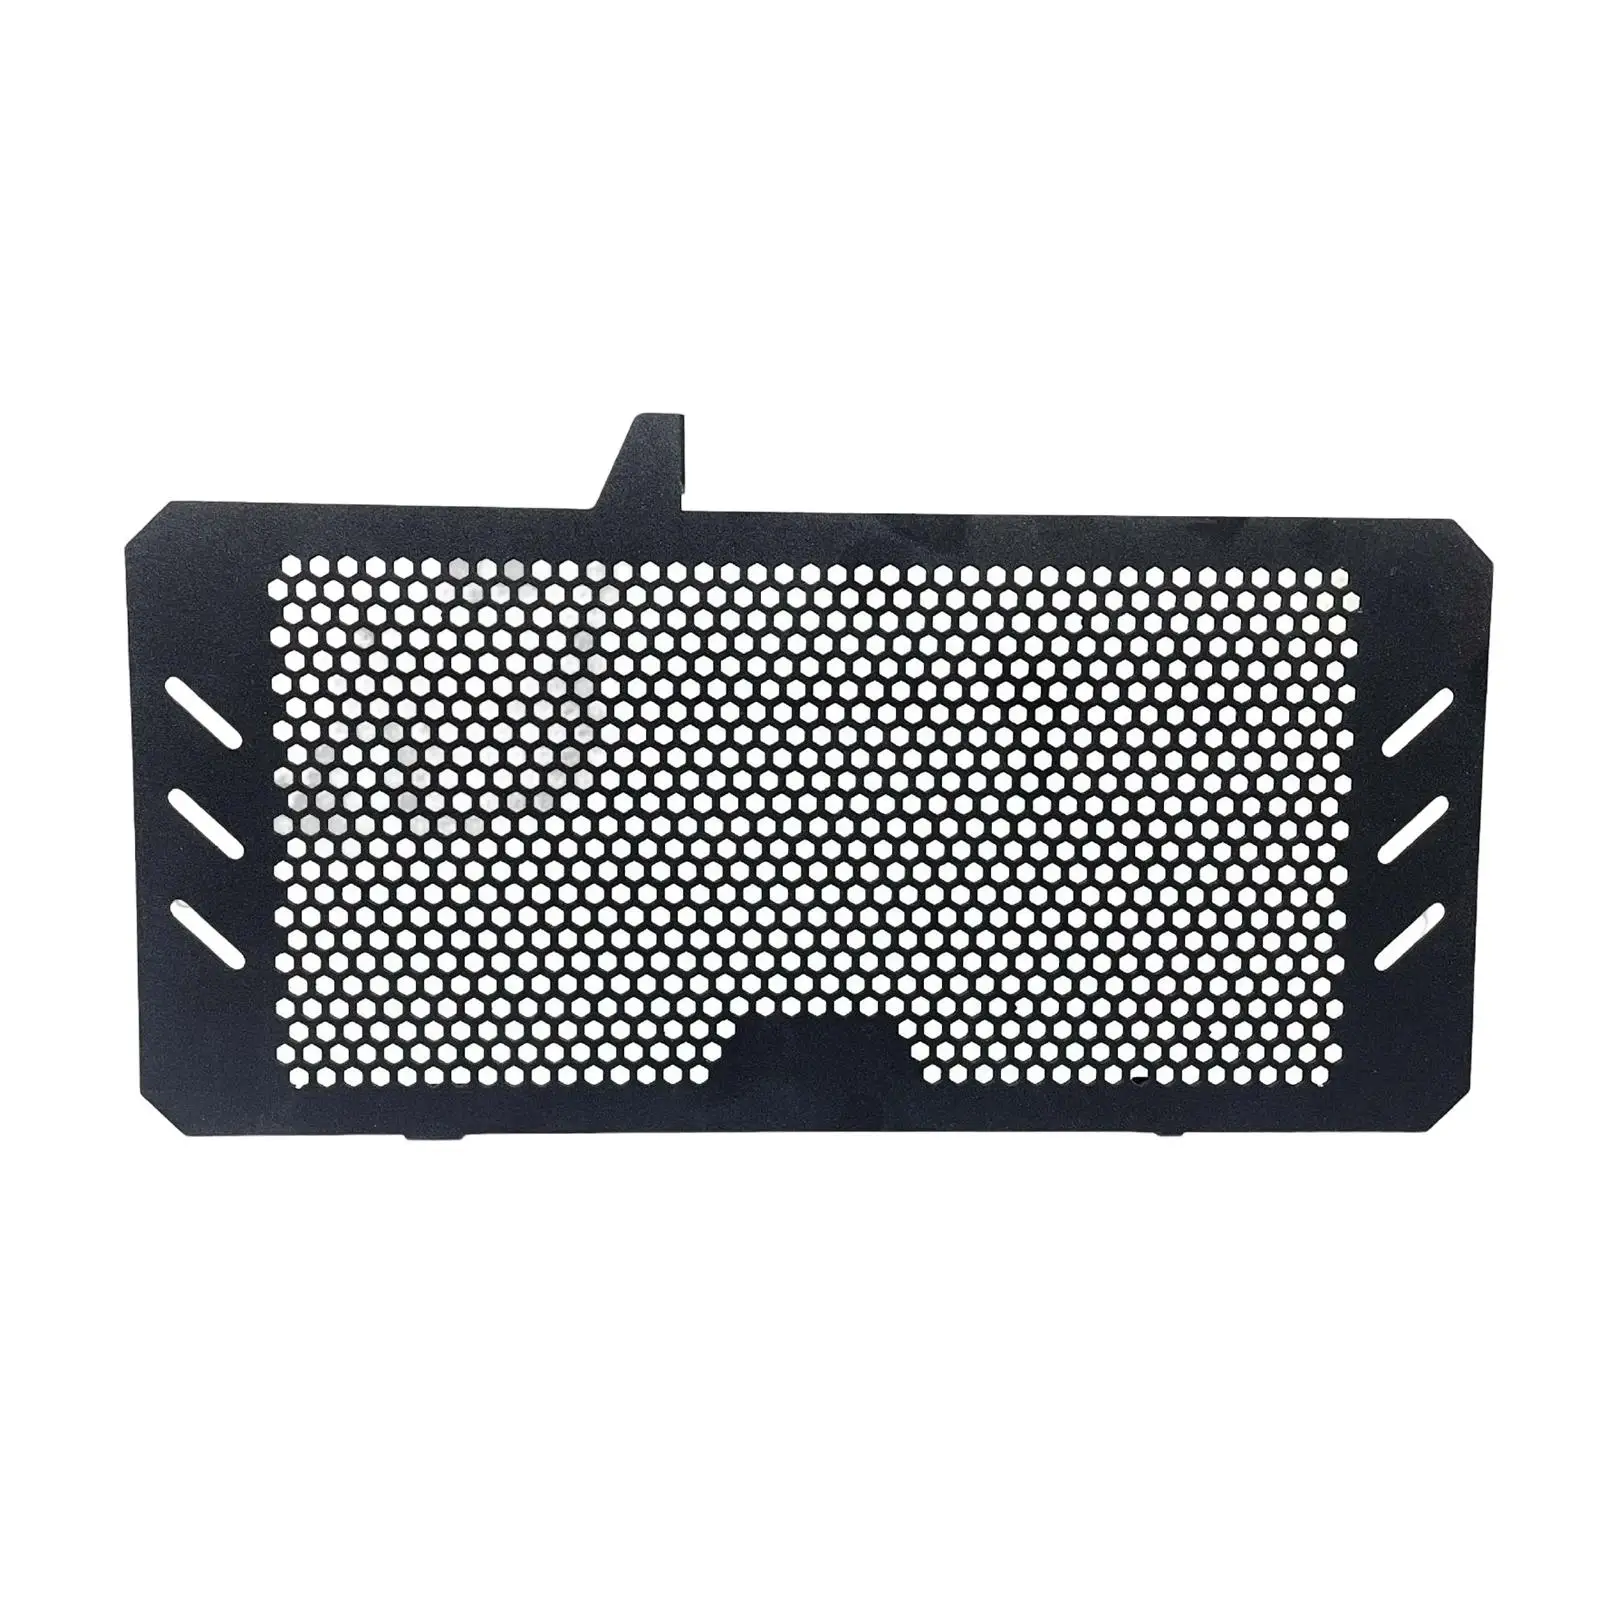 Motorcycle Grille Guard for NC750 S / x Replacement Aluminum Alloy